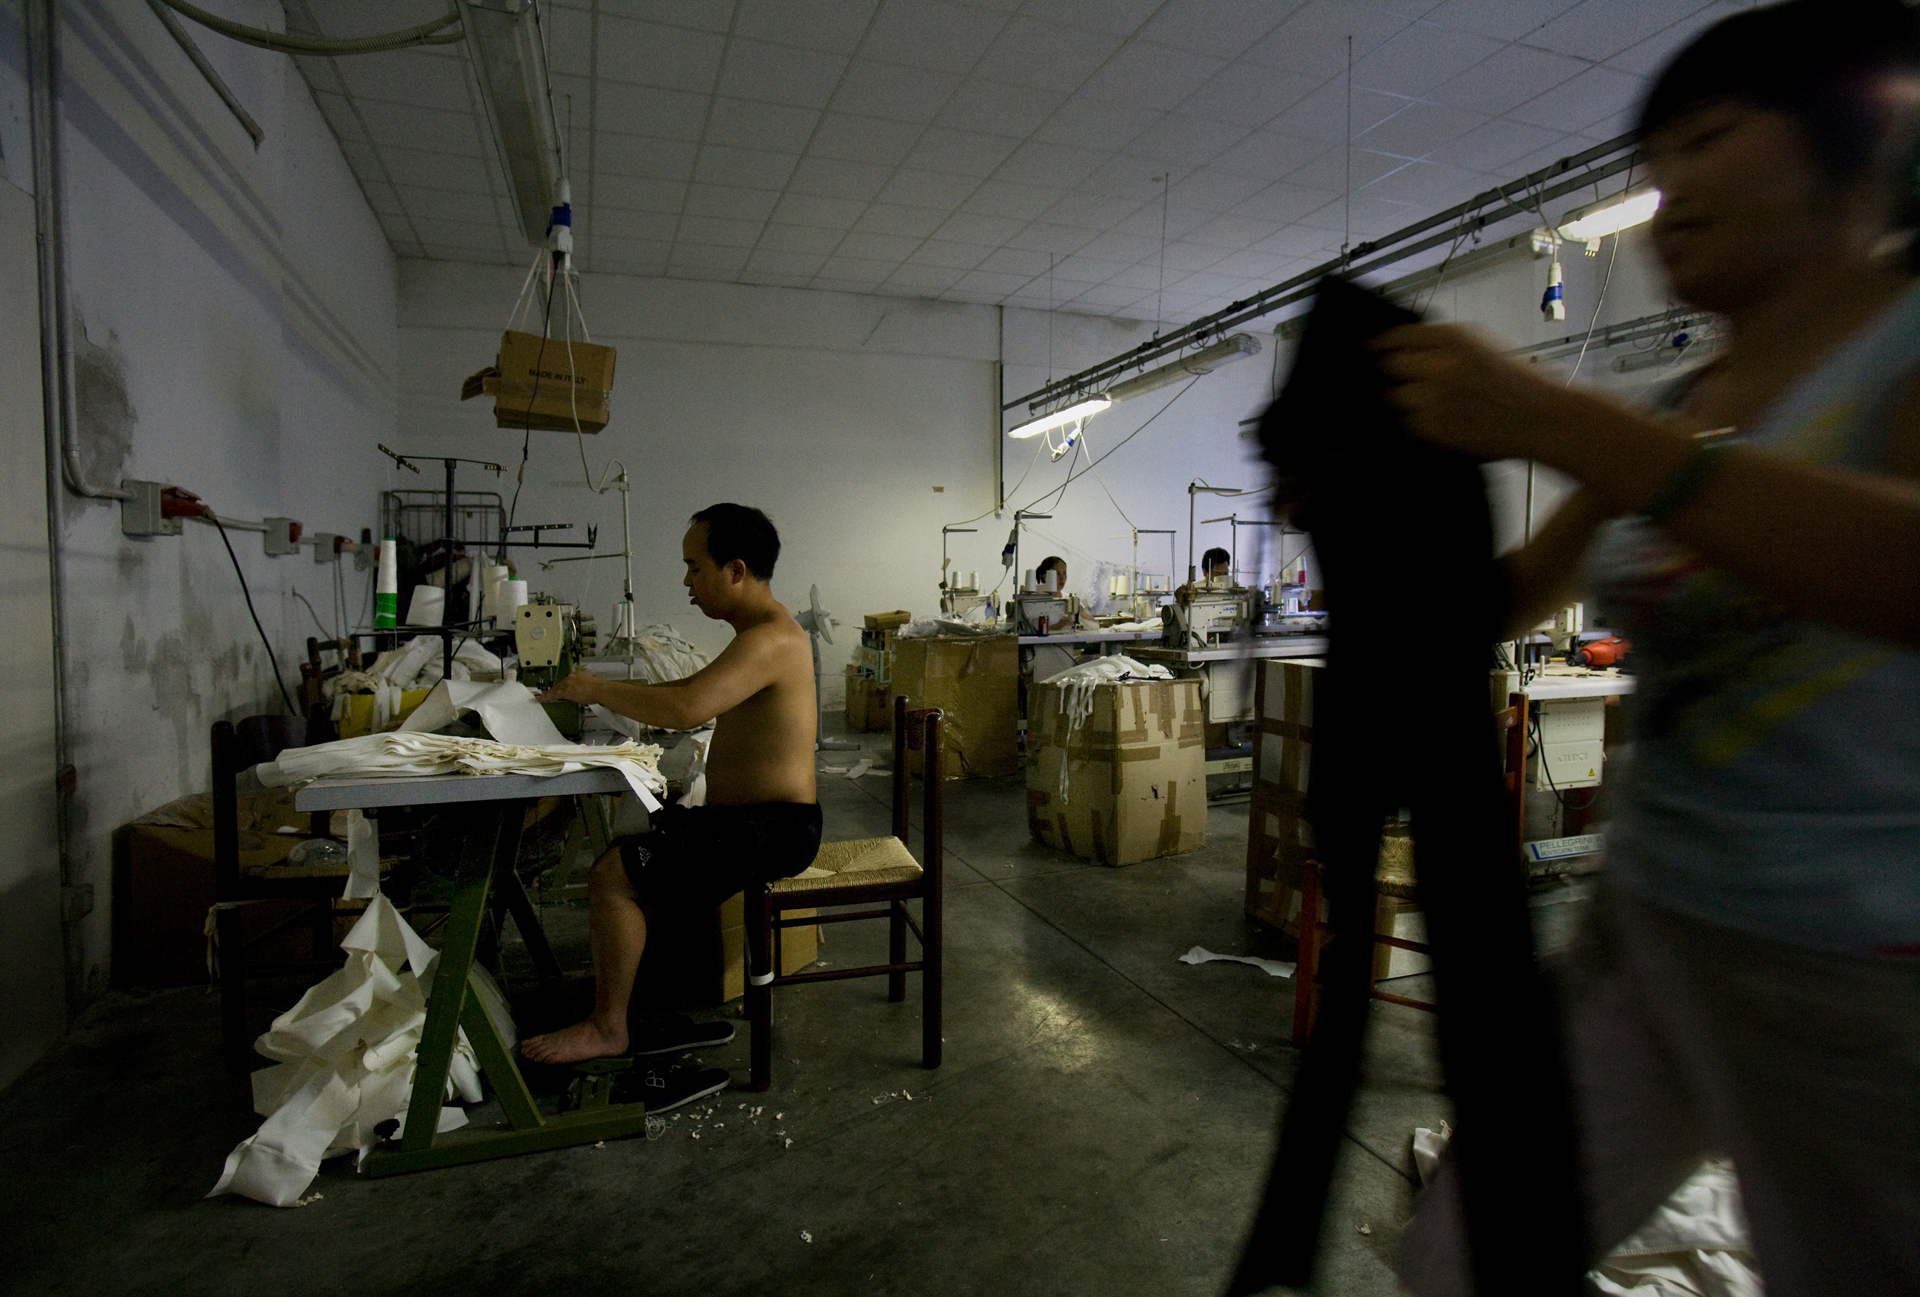  The success of the “Chinese Pronto Moda”, or "ready-to-wear", factories is based on a disregard for standard labor laws. Employees, often including families with young children, live communally in factory warehouses, often working round the clock un